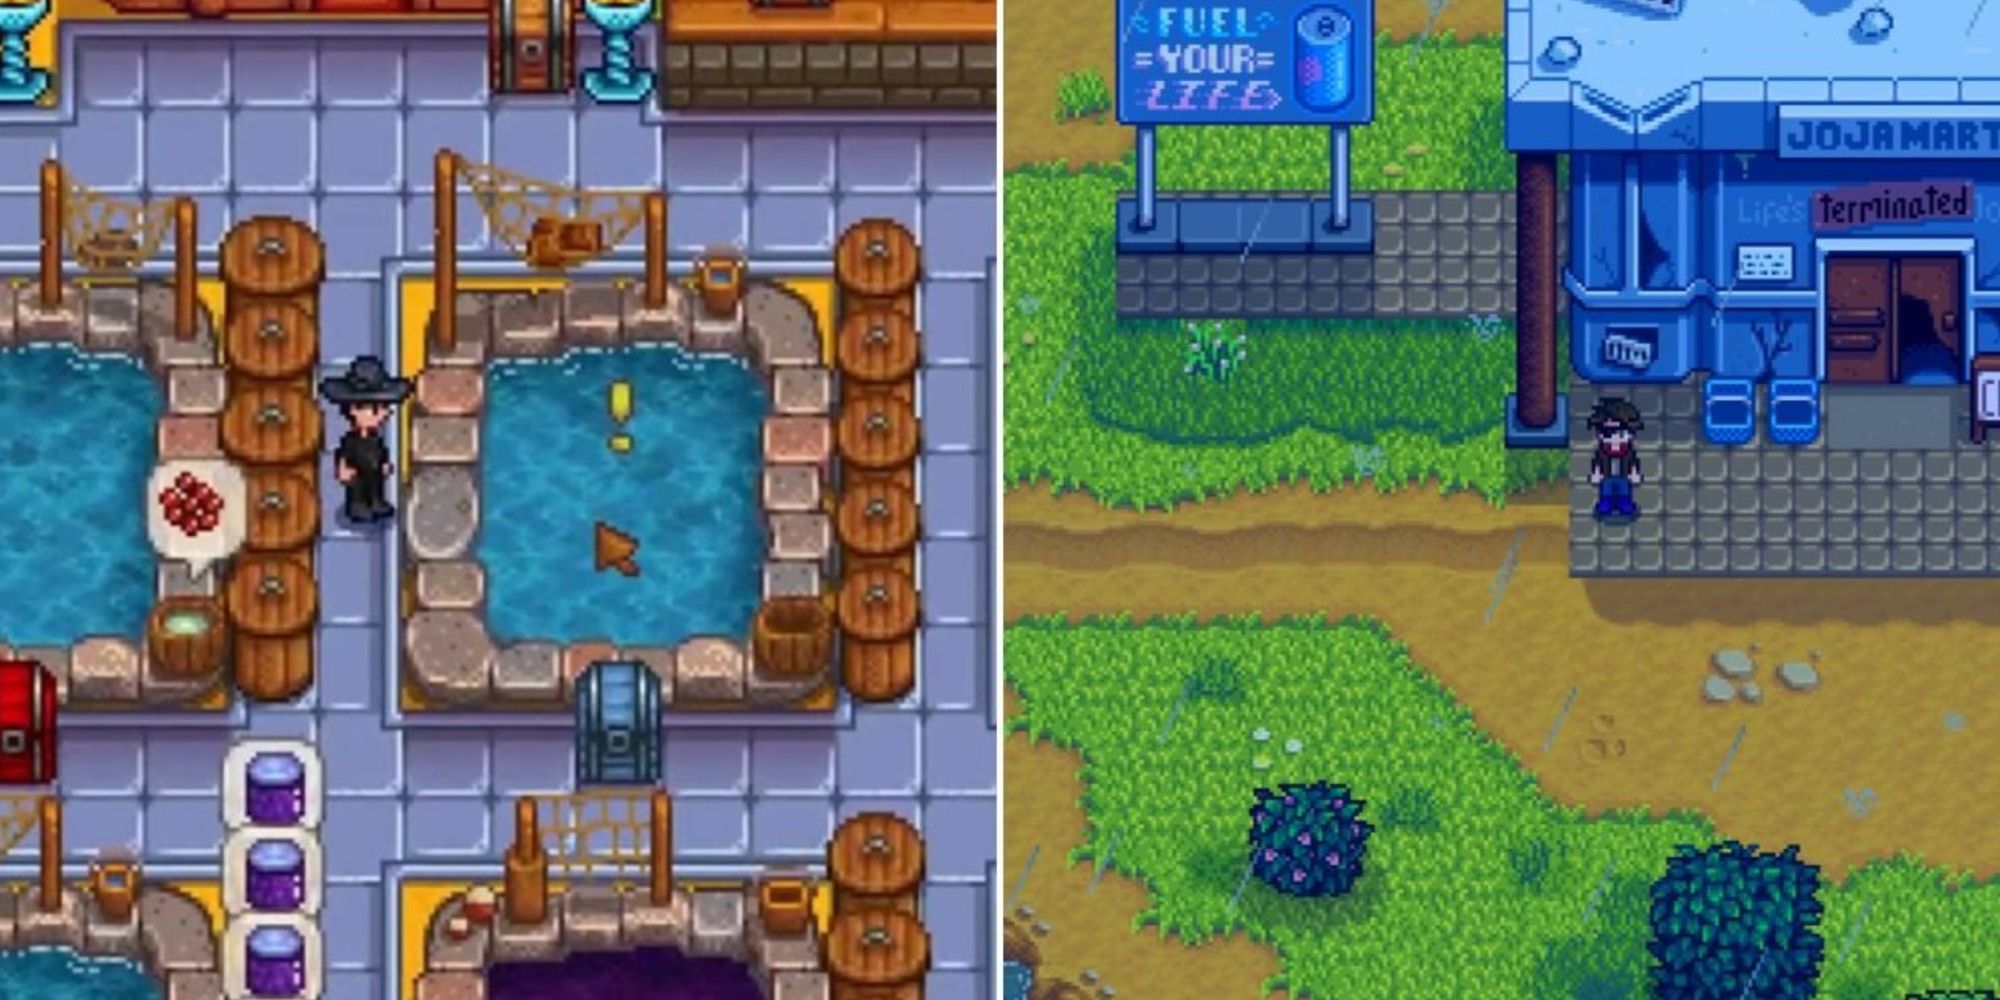 Split image screenshots of a Stardew Valley player character standing next to a fish pond and outside of JojaMart.